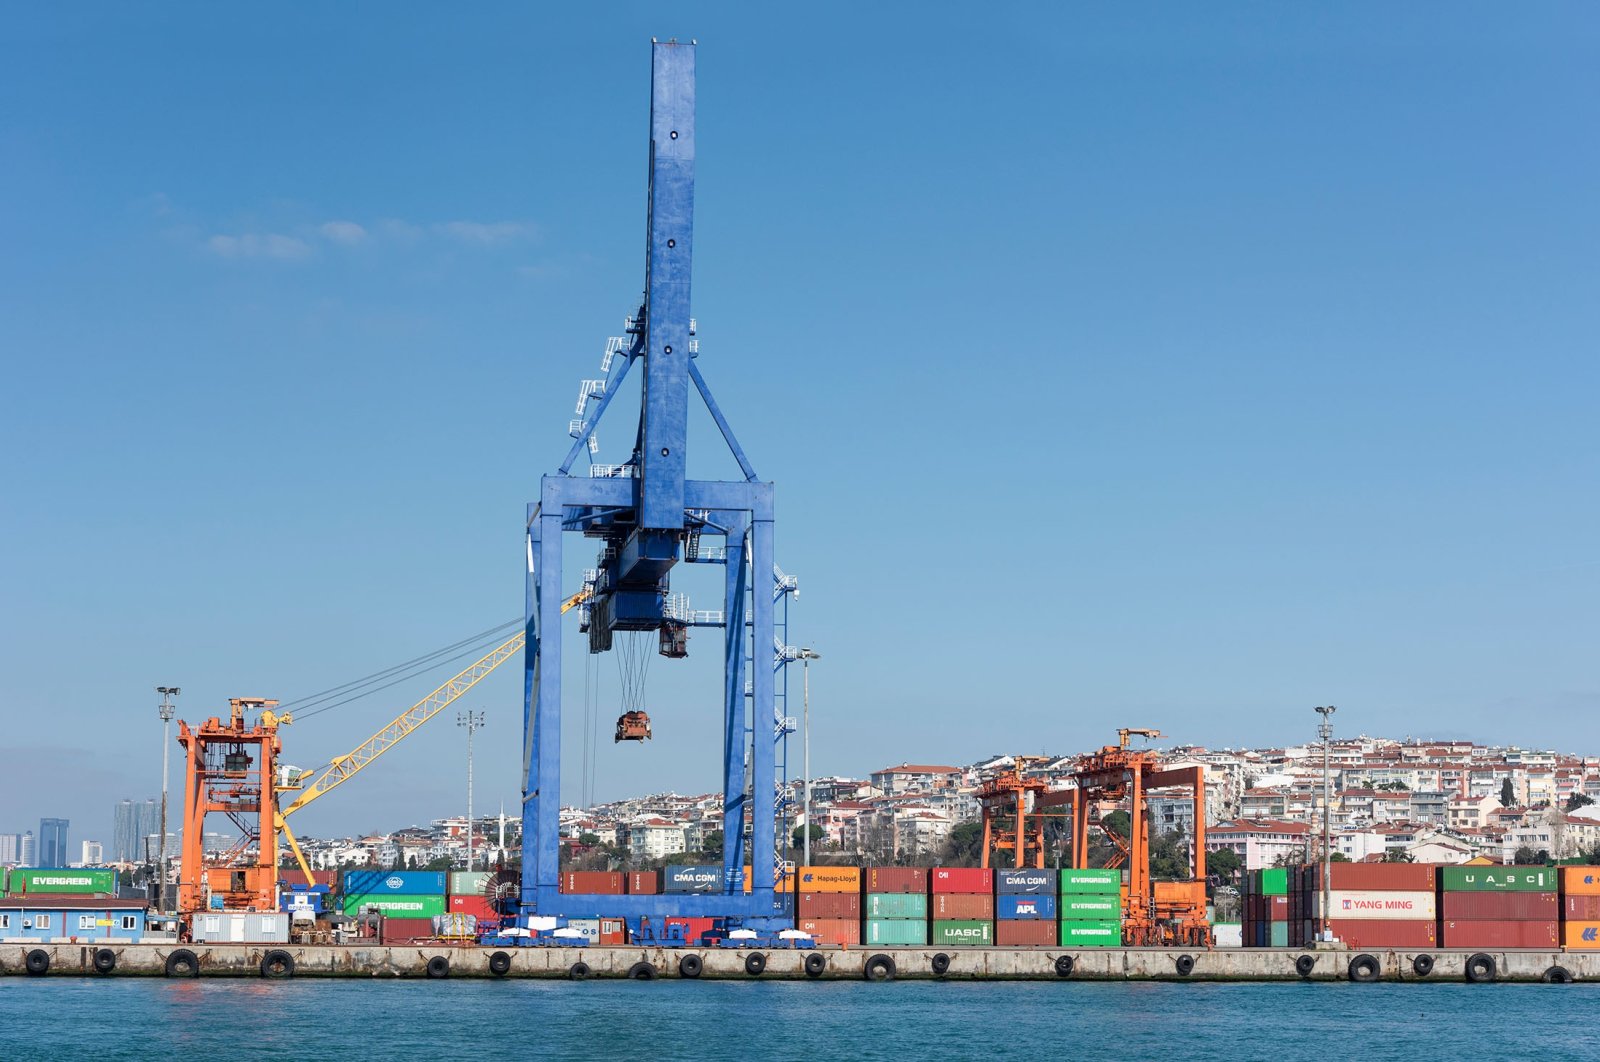 A container terminal at the port of Haydarpaşa in Kadıköy, Istanbul, Turkey, April 22, 2021. (Shutterstock Photo)